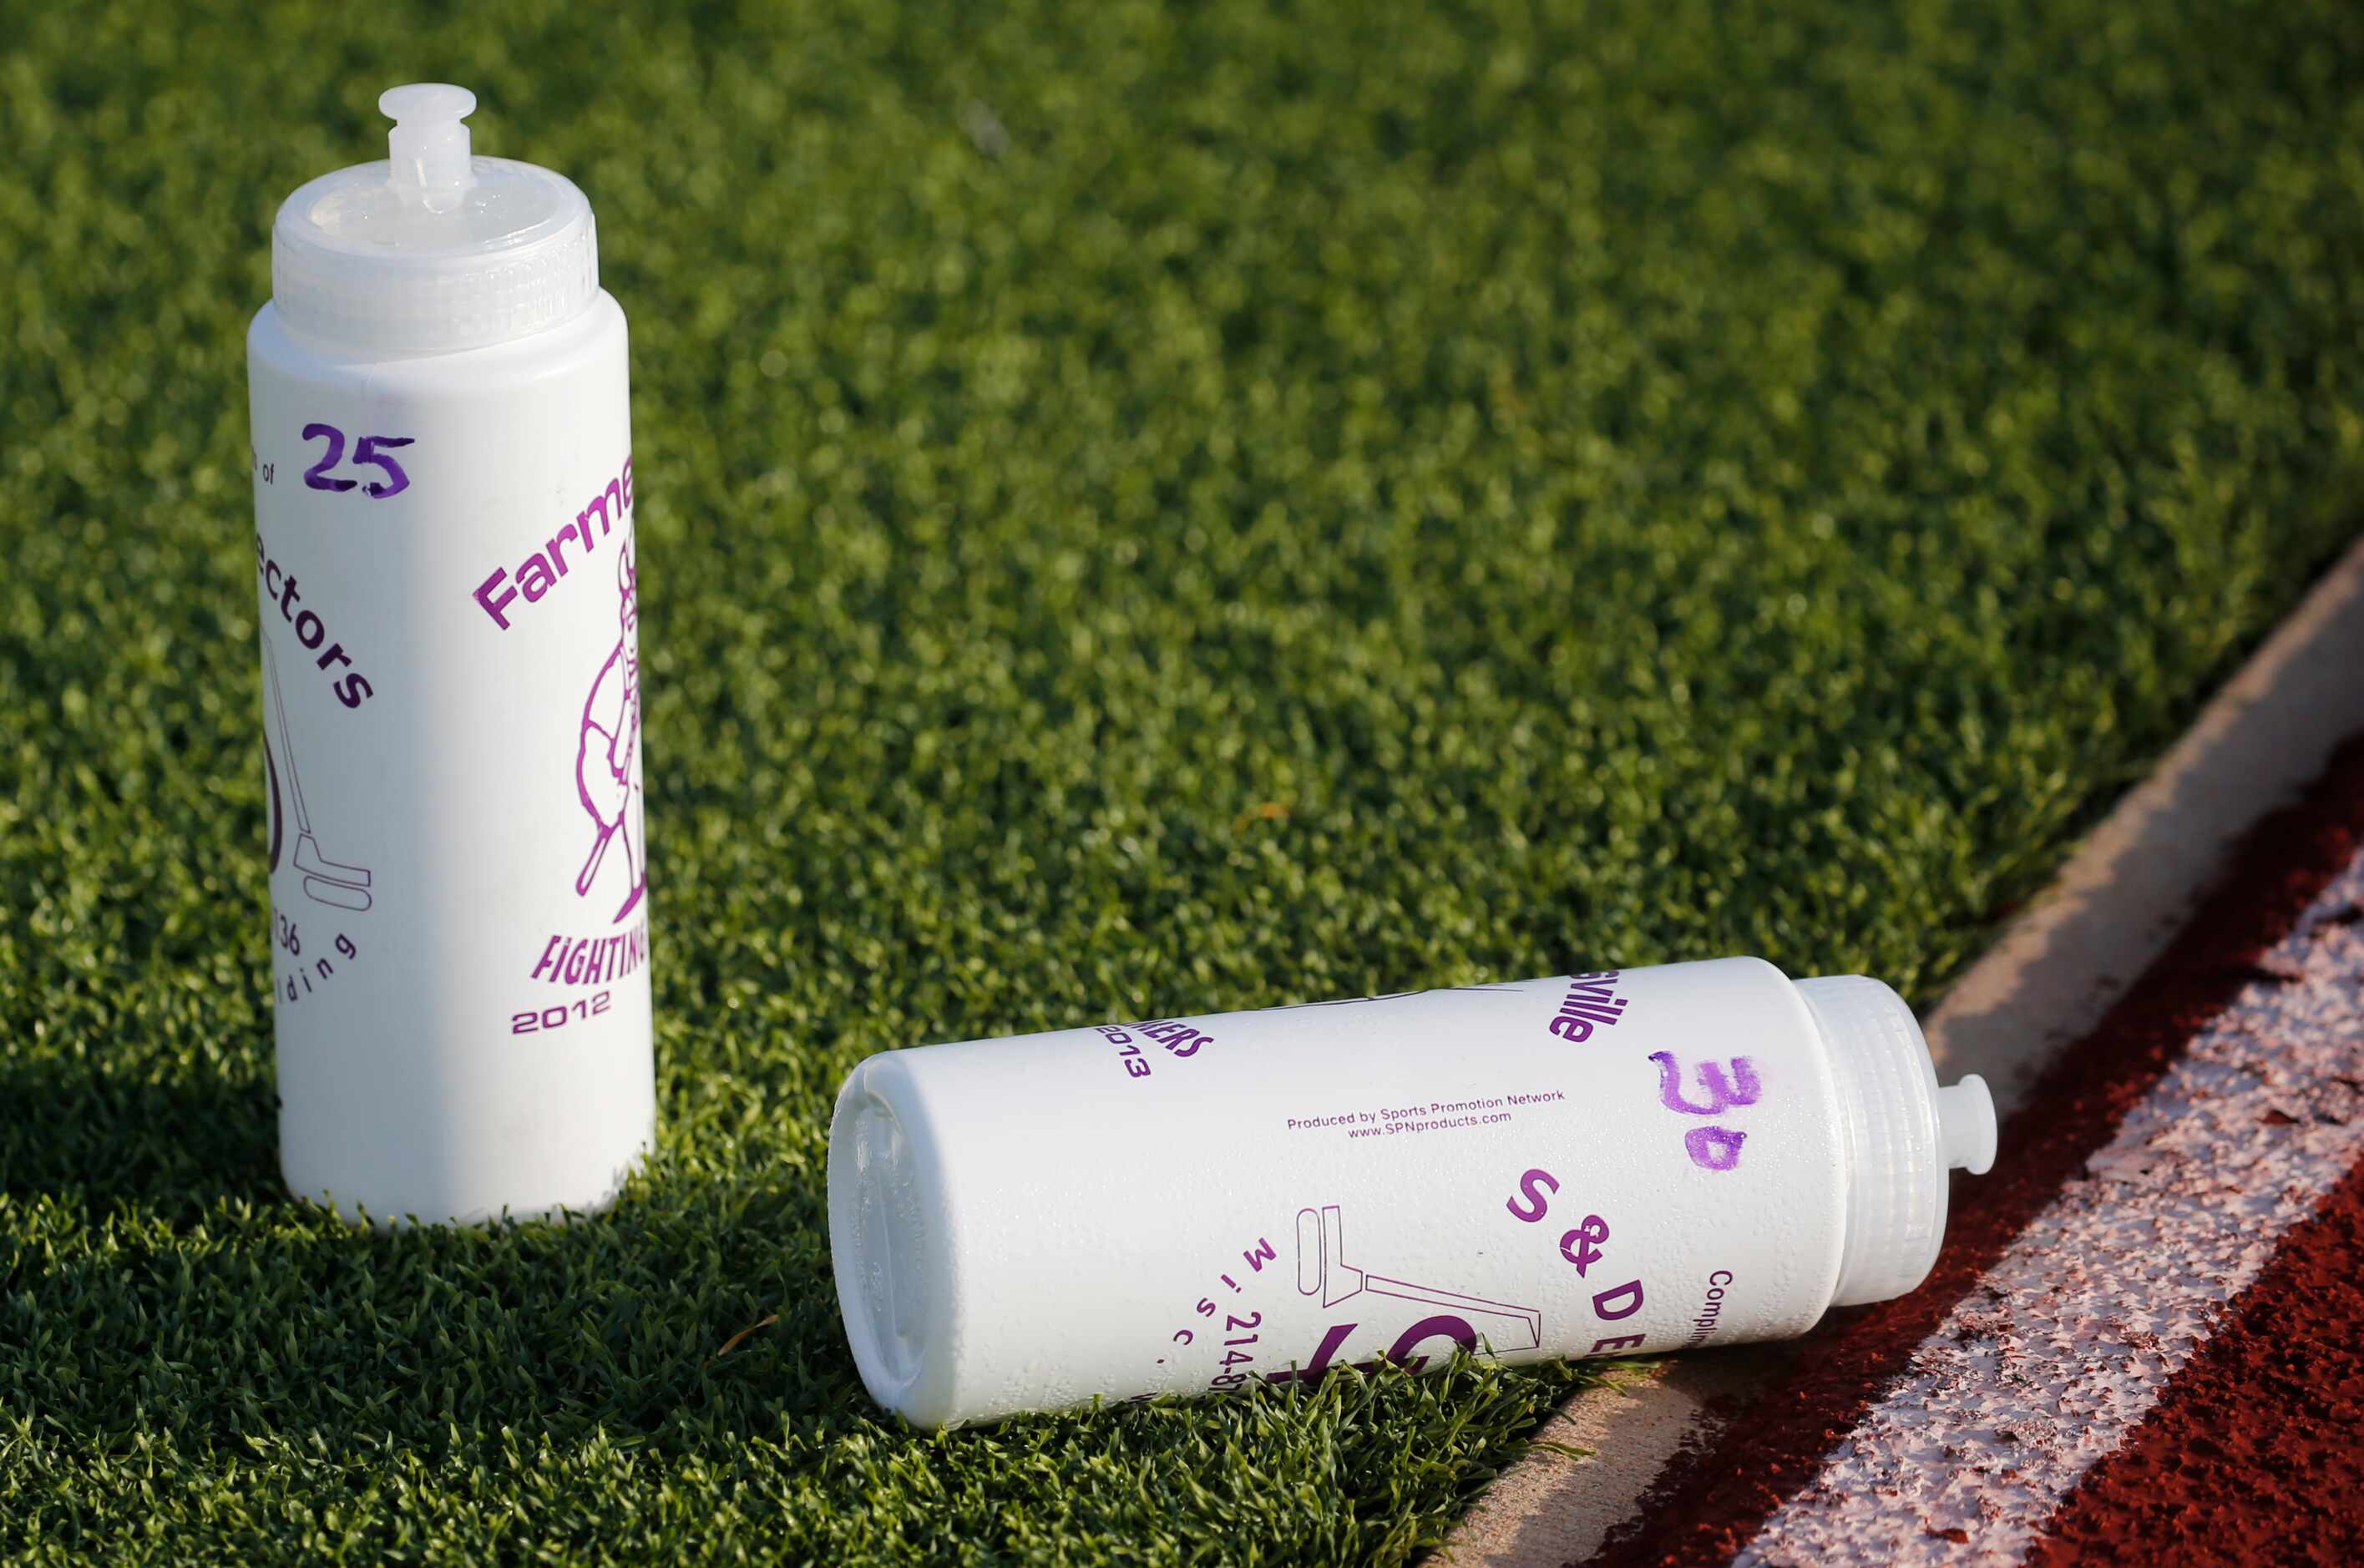 Each player has their own individually marked water bottle for use during the first day of...